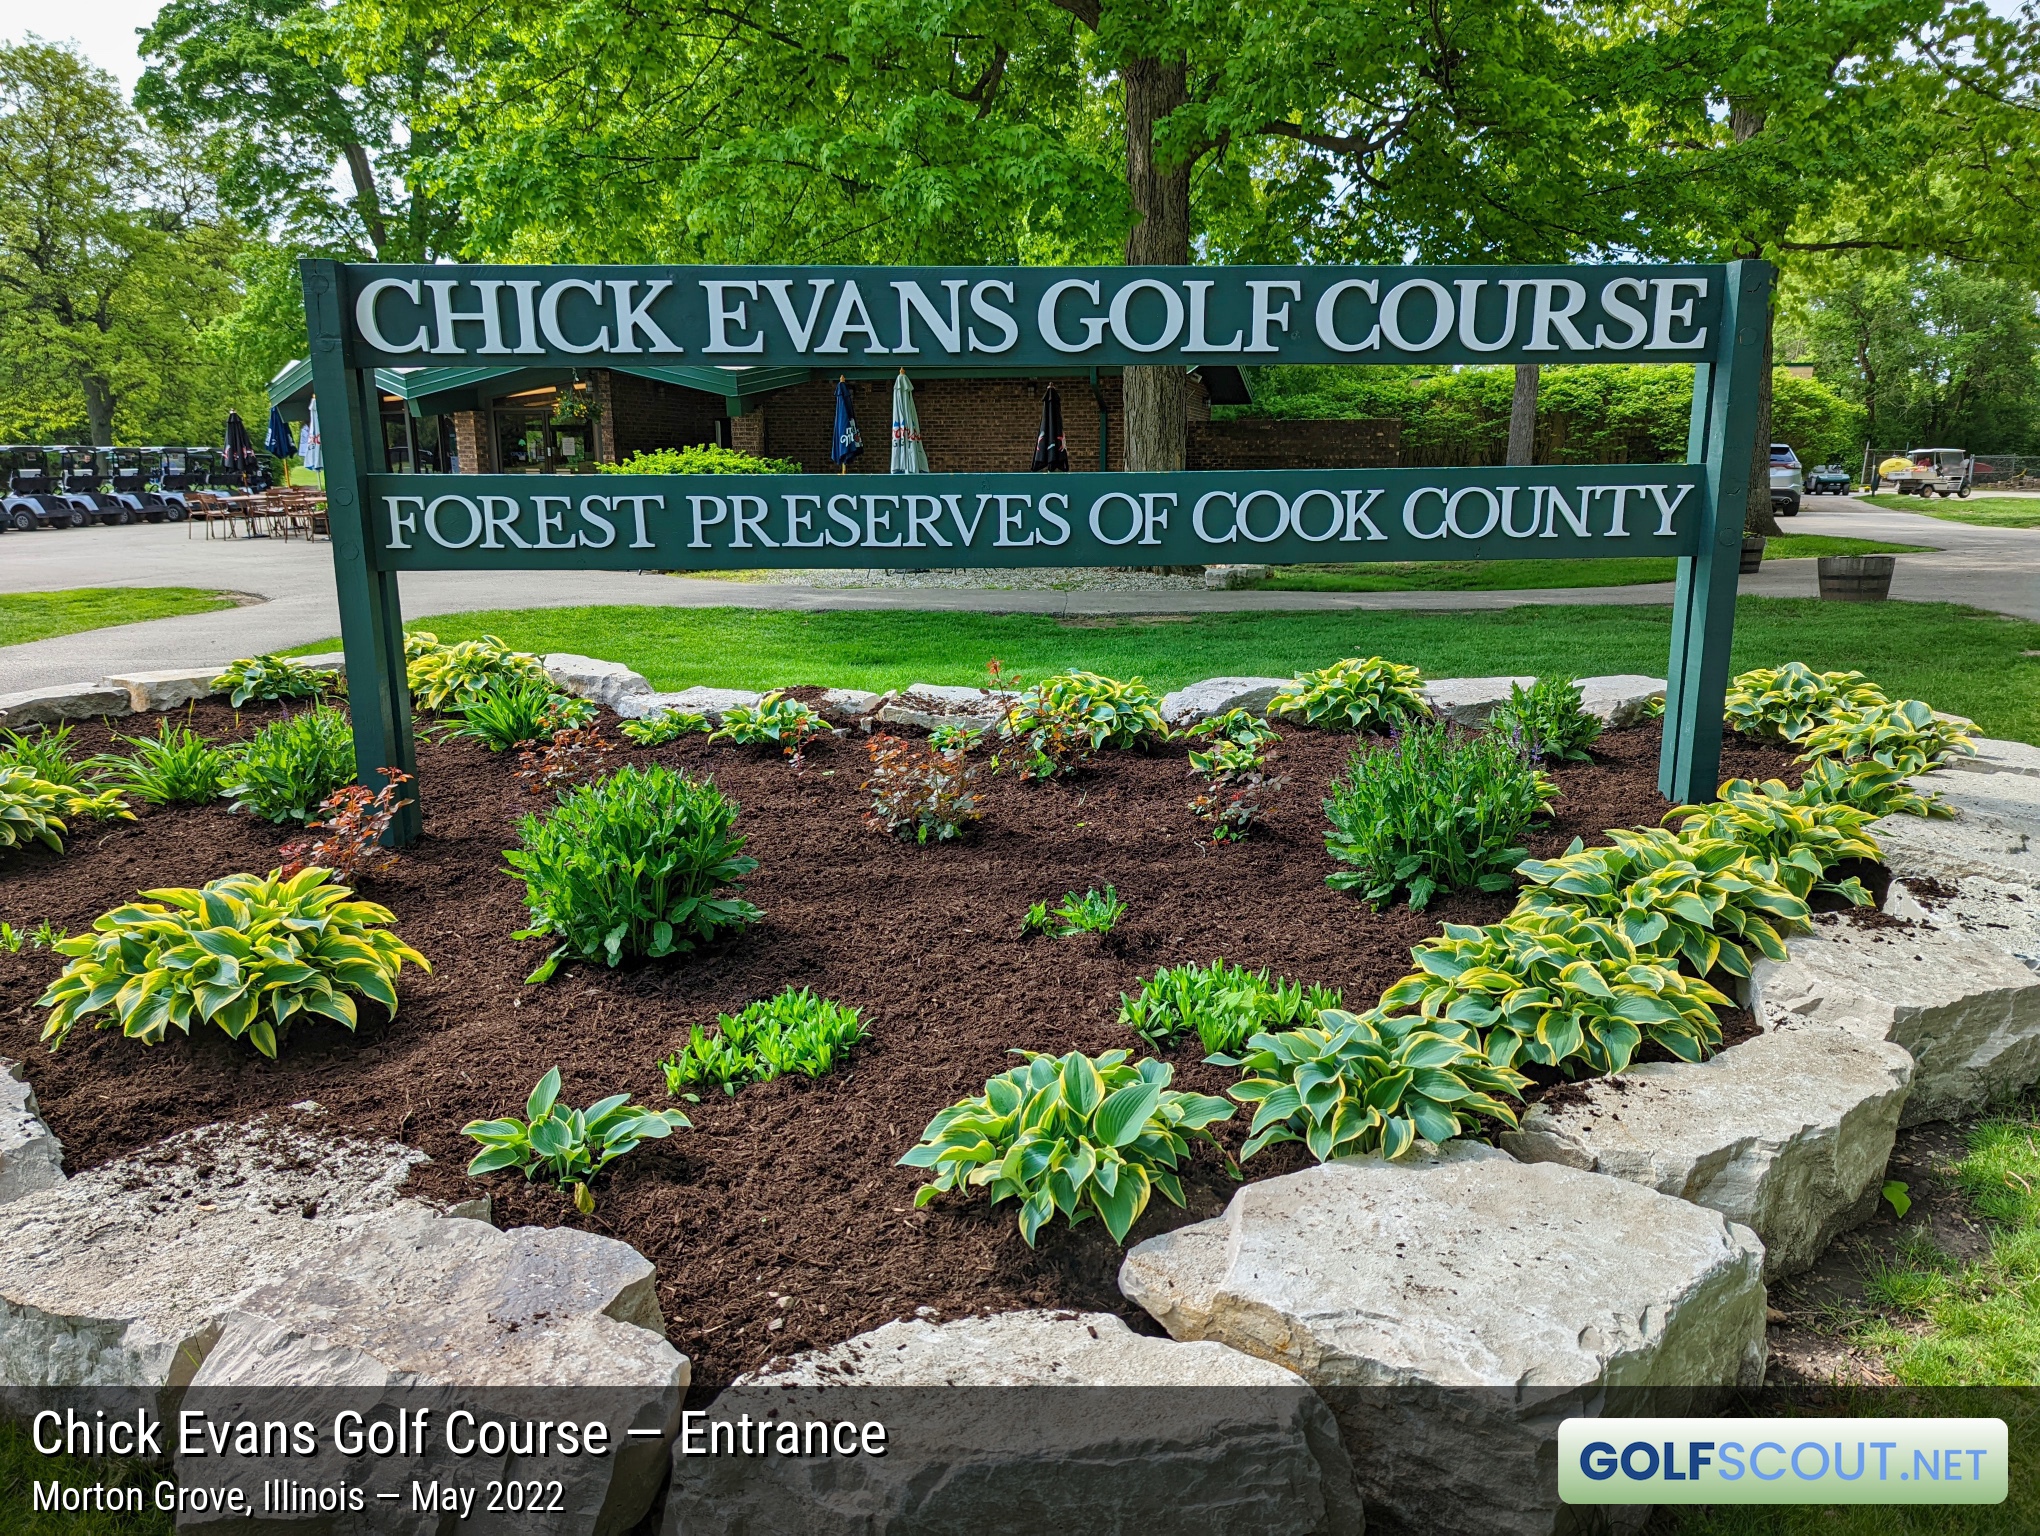 Photo of the entrance at Chick Evans Golf Course in Morton Grove, Illinois. The Cook County Forest Preserve owns Chick Evans golf course, along with 10 other golf courses, including Burnham Woods, Billy Caldwell, Edgebrook, George W. Dunne, Indian Boundary, and more.